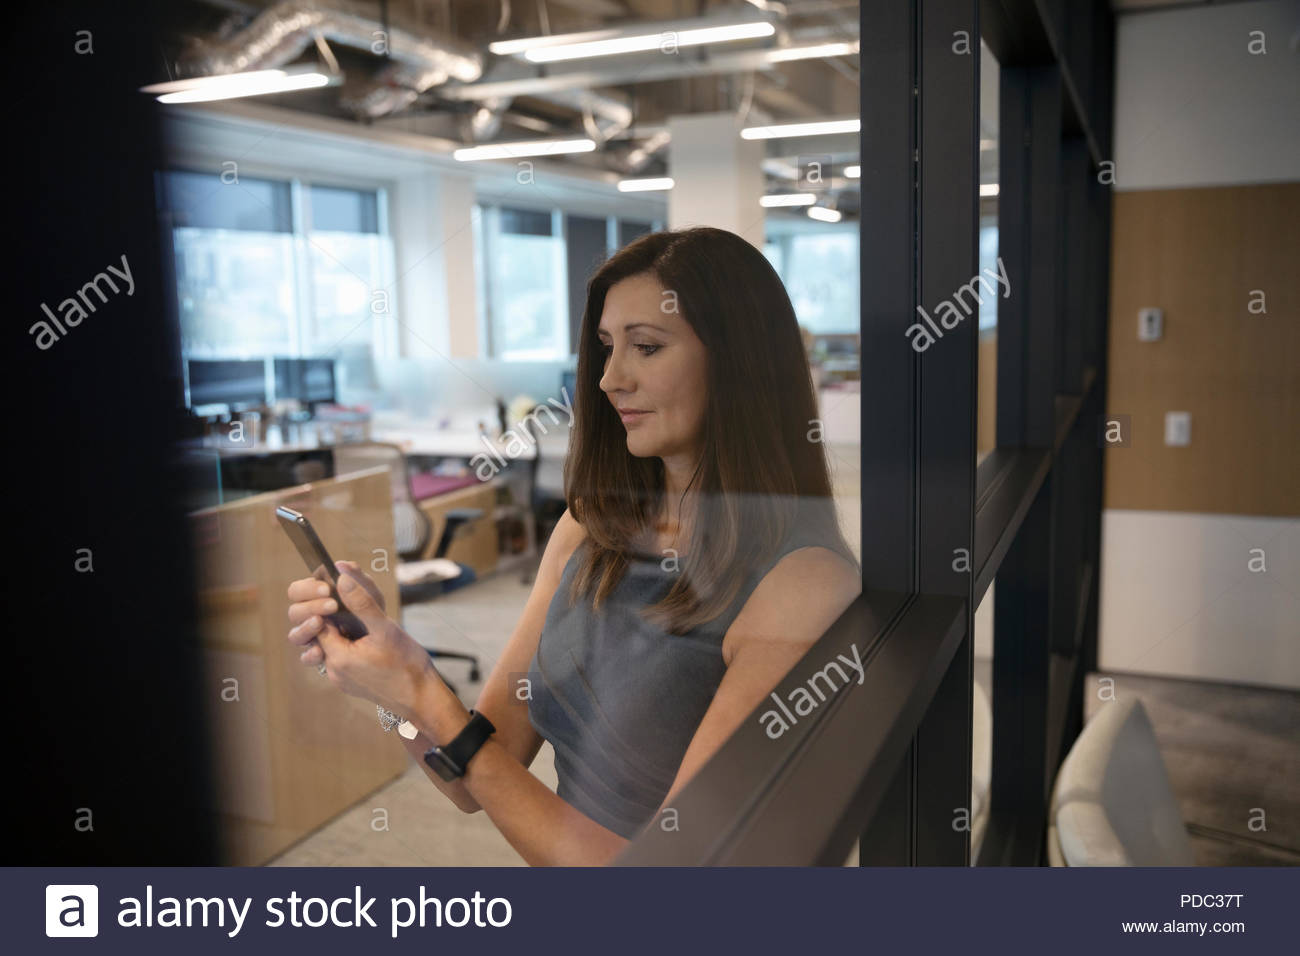 Businesswoman using smart phone in office Banque D'Images